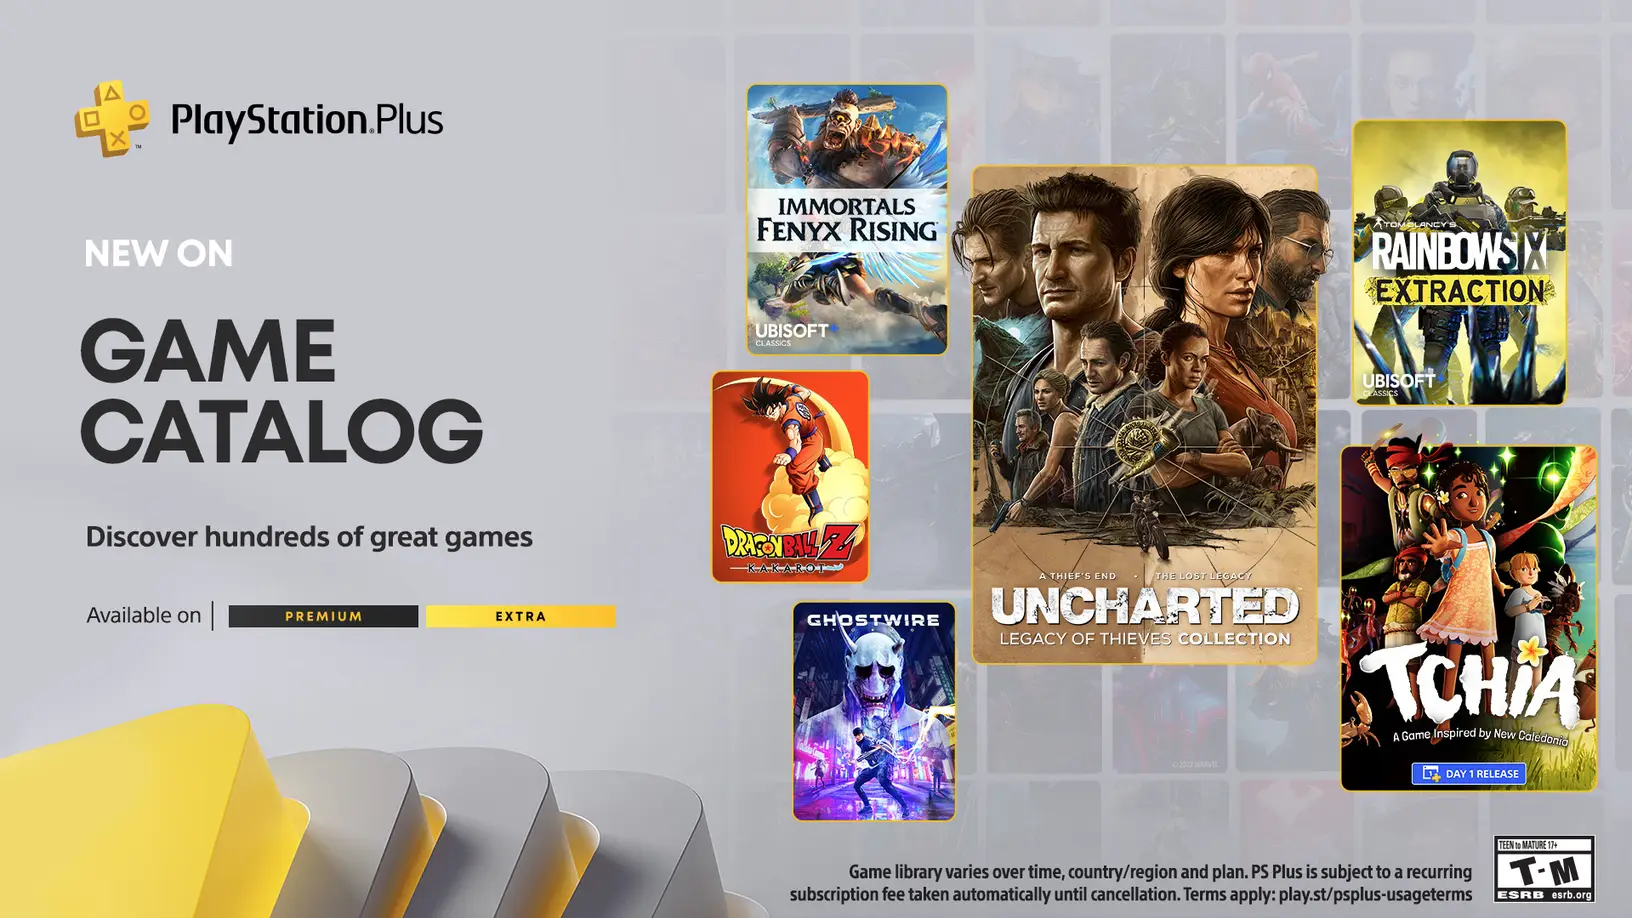 March’s PlayStation Plus Game Catalog and Classics titles have been